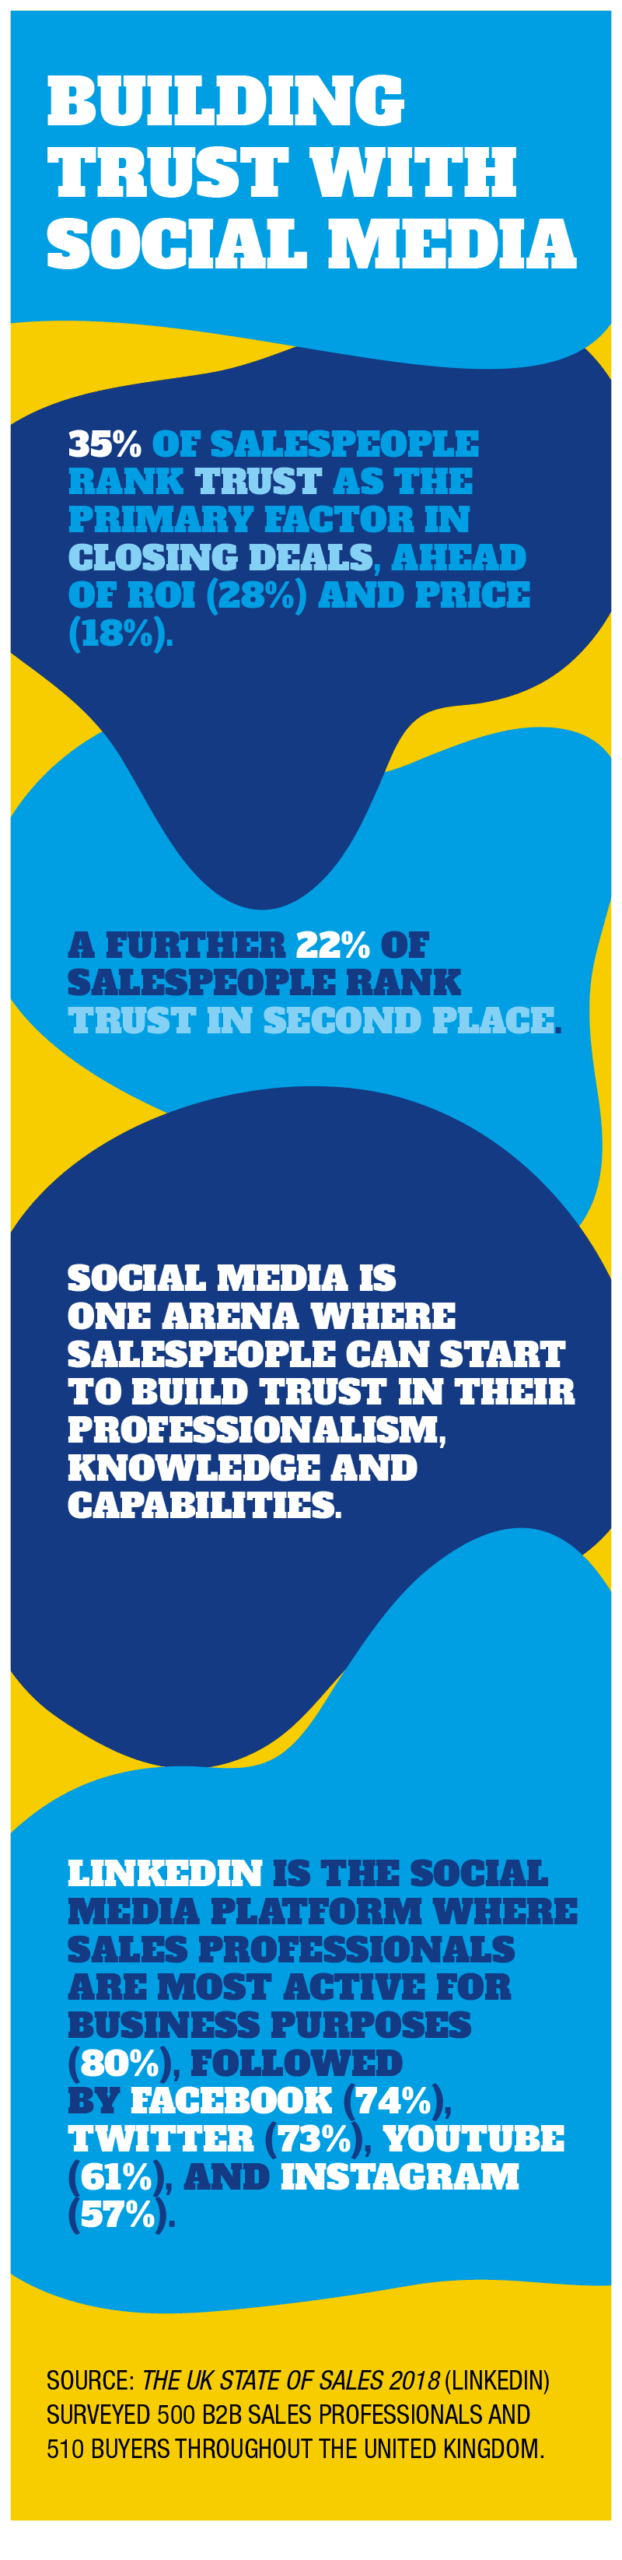 Building trust with social media